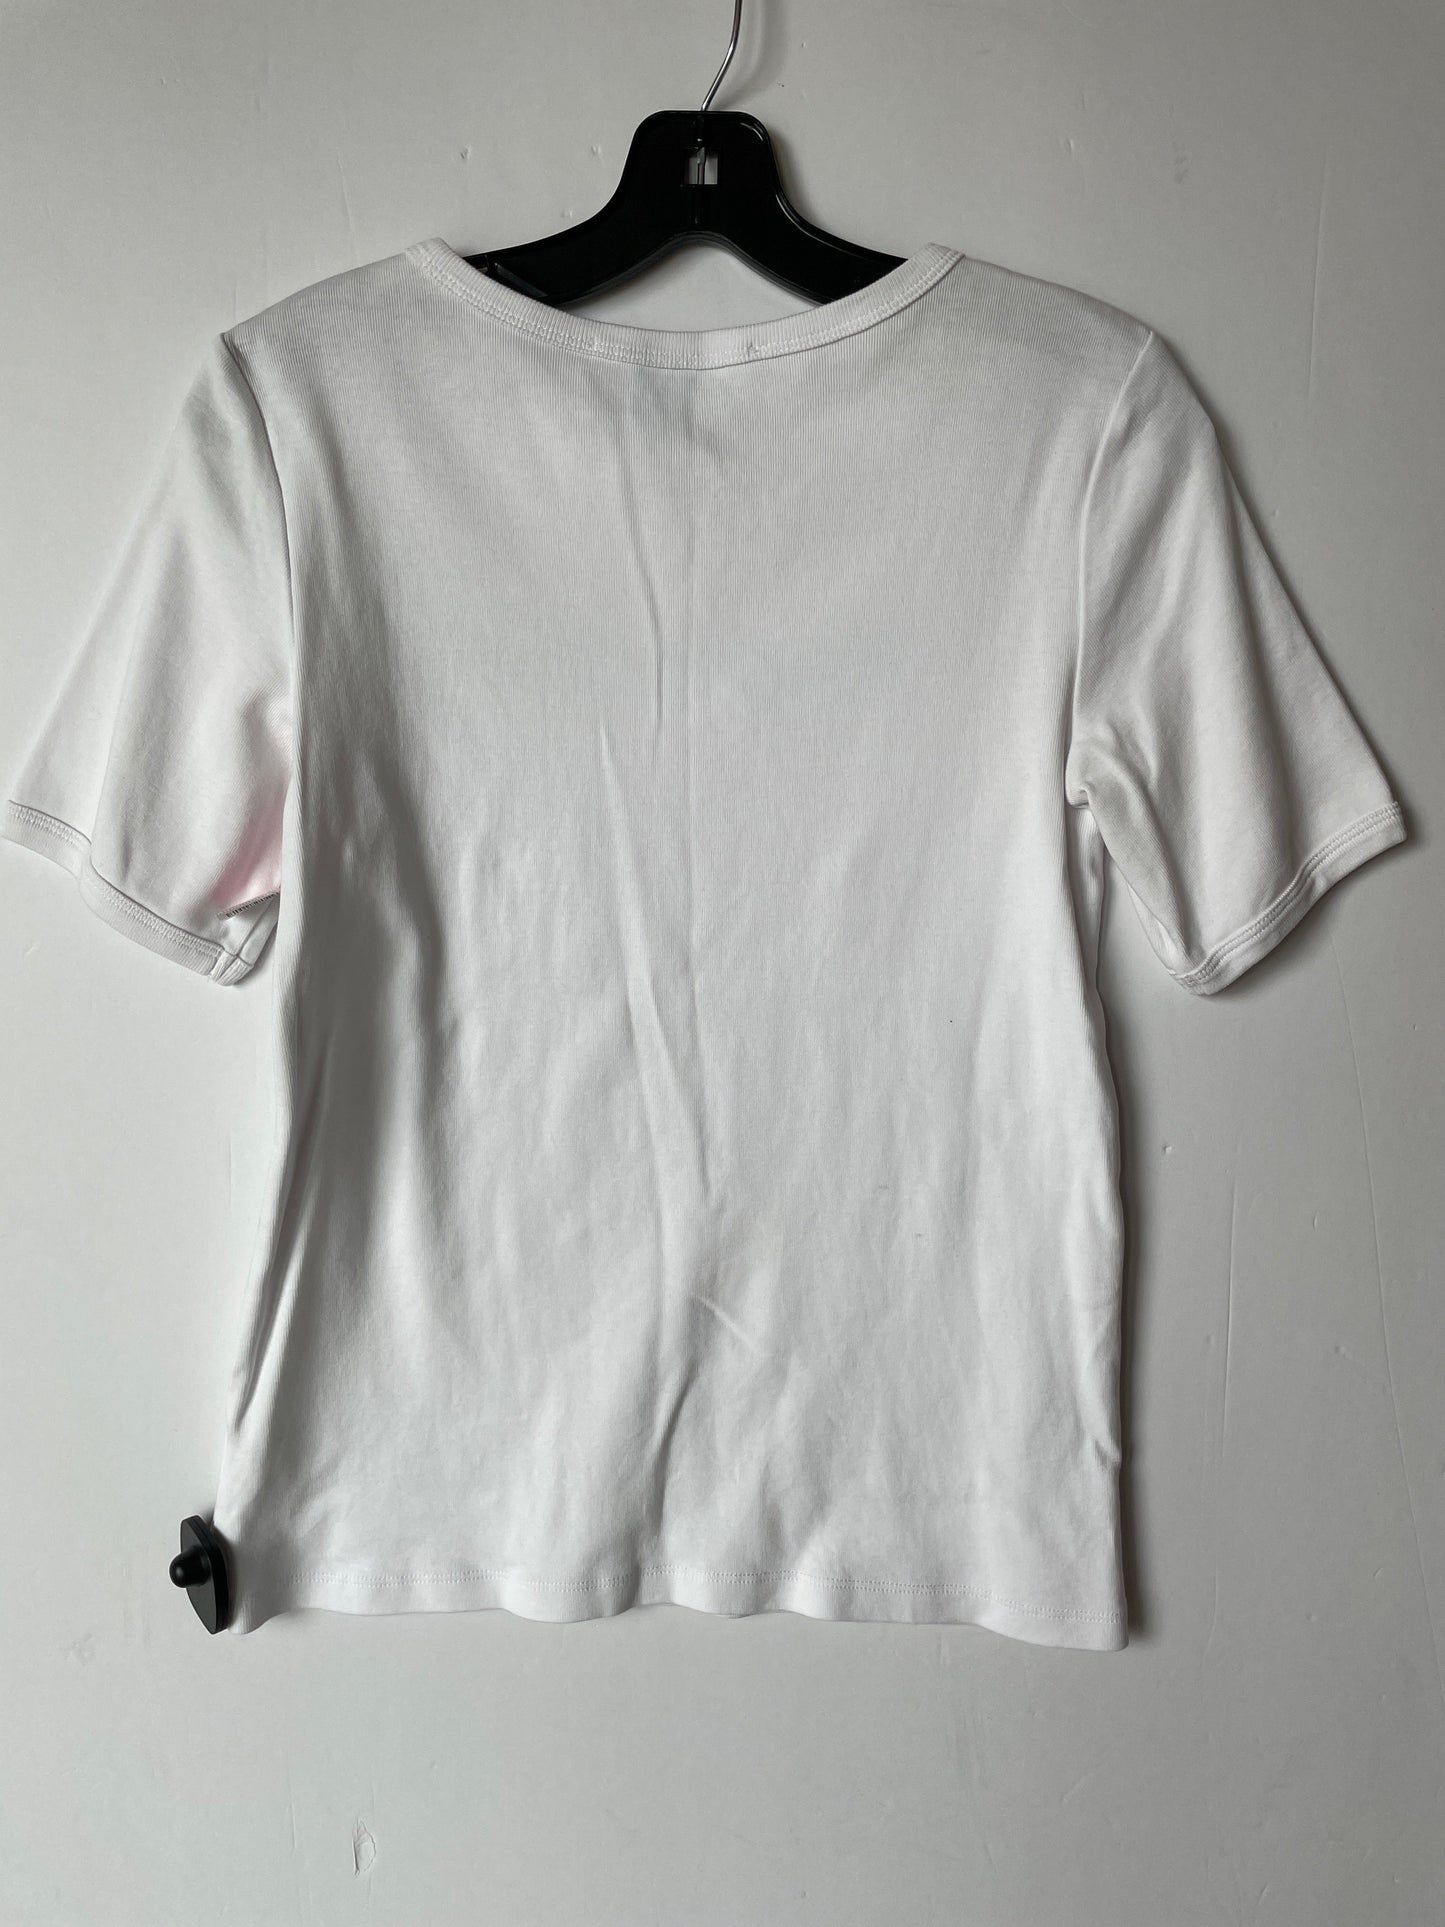 Top Short Sleeve By Draper James  Size: S